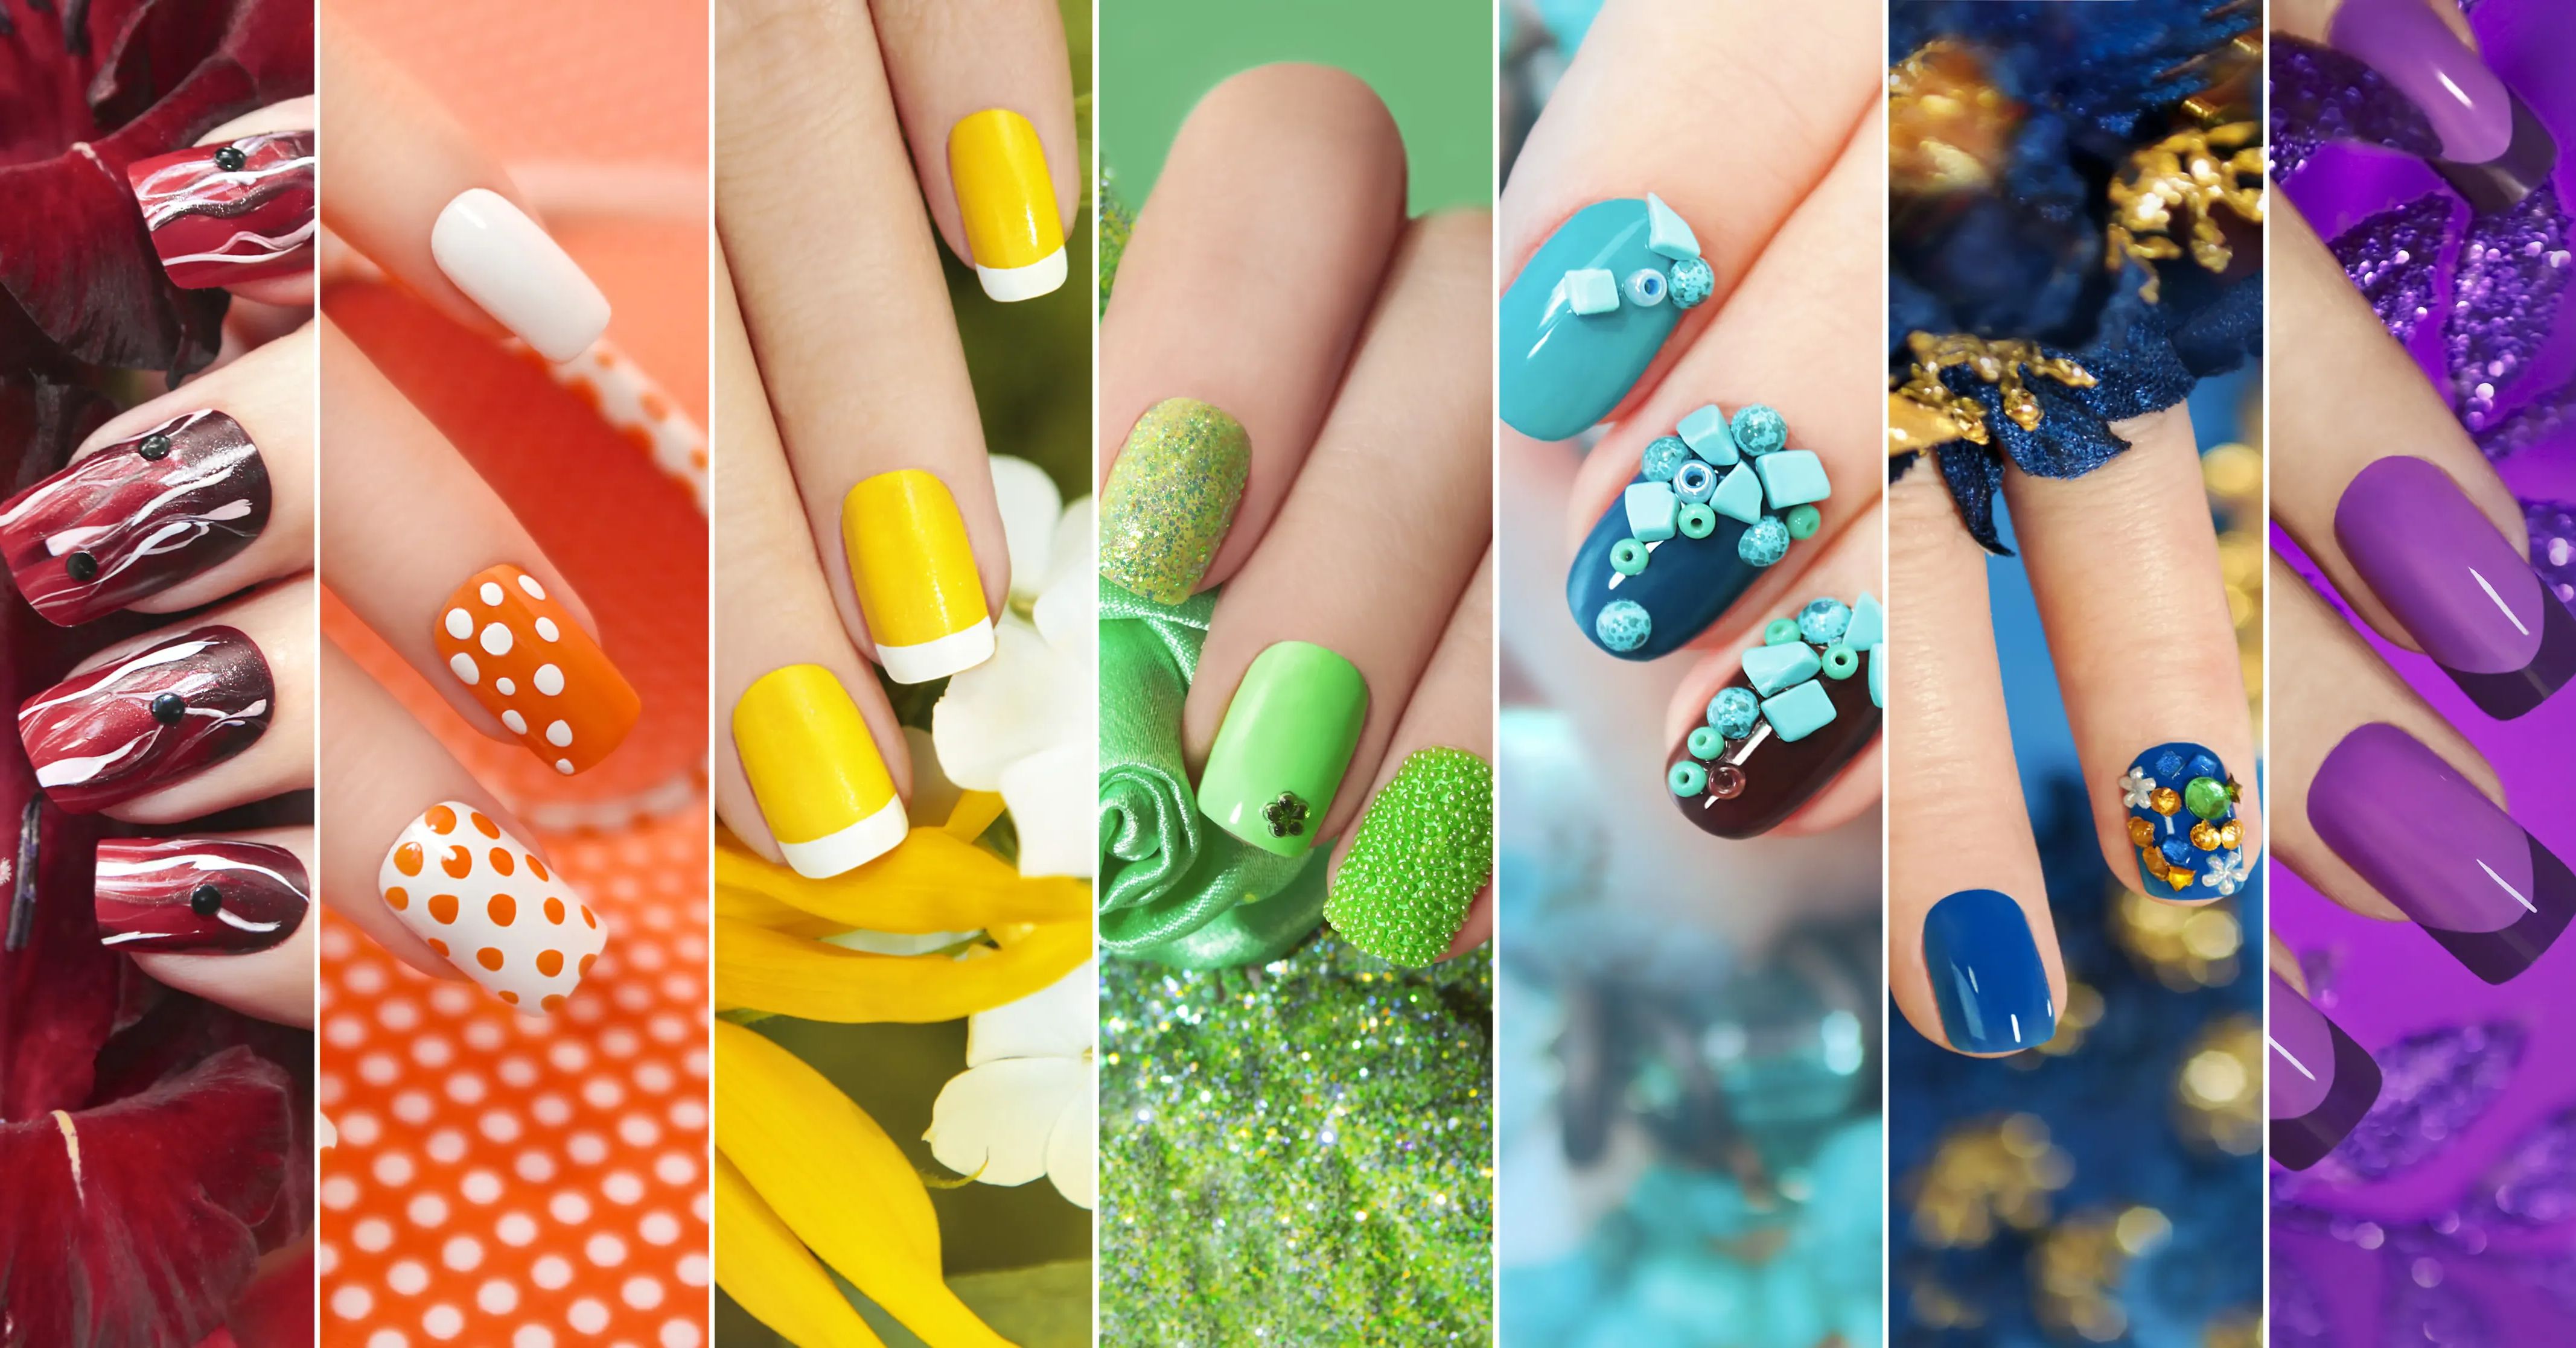 5. Download Nail Art Games for PC - Free Nail Art Games for PC - wide 5